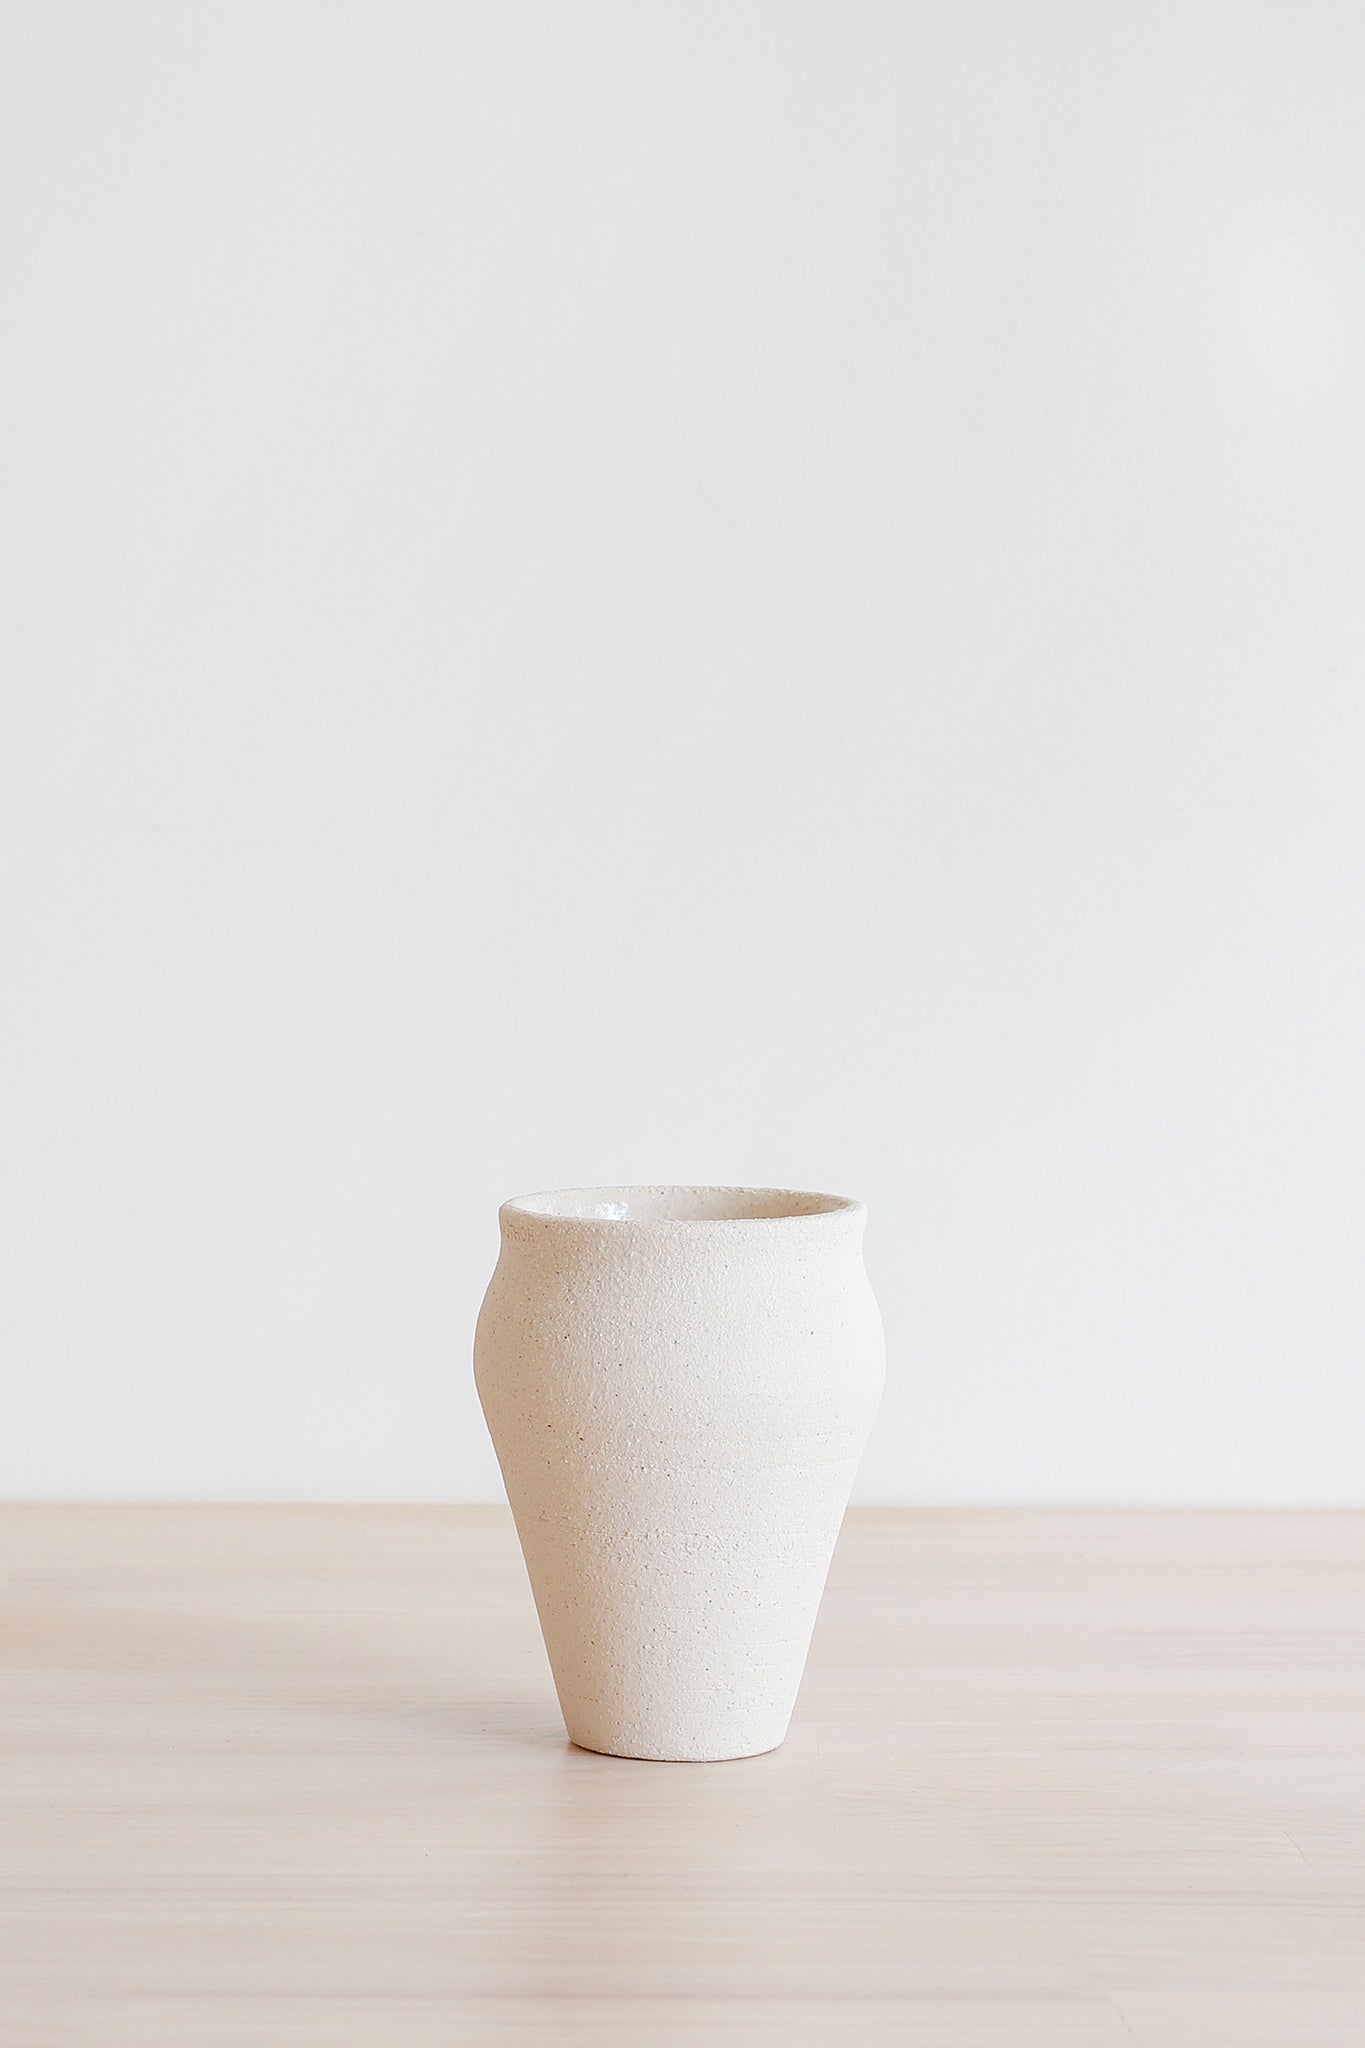 END OF PRODUCTION | The Vase